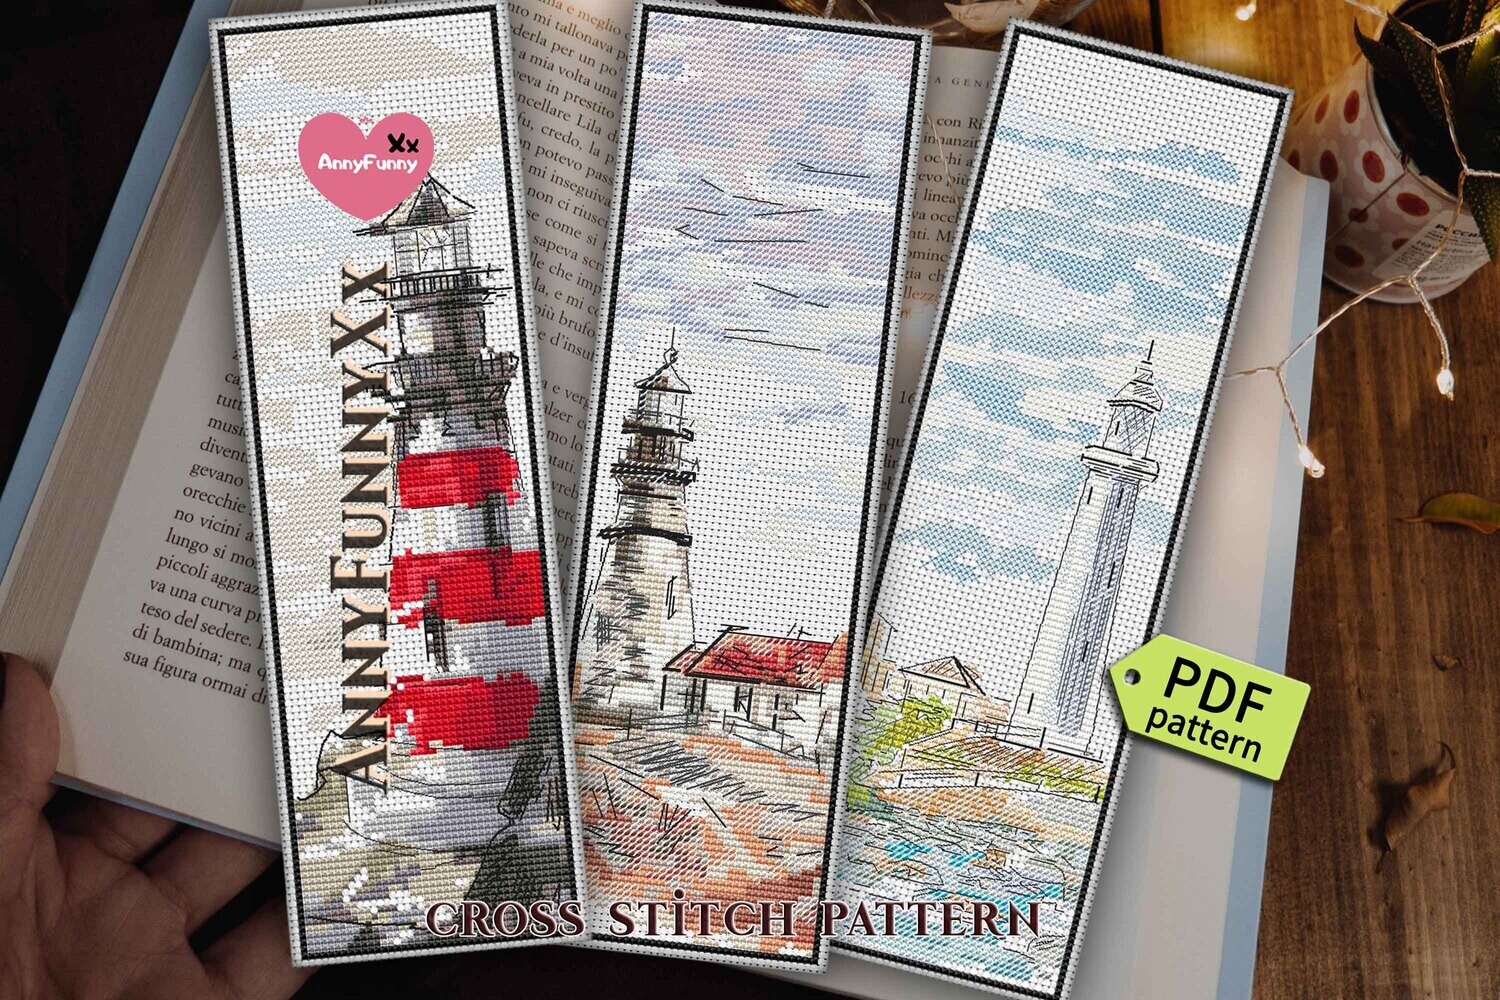 Lighthouse bookmark cross stitch pattern PDF,Bookworm teacher gift, Follow your dreams, Nautical ocean lover gift for men Digital download, Custom counted cross stitch chart, Sea bookmarks, Handmade D